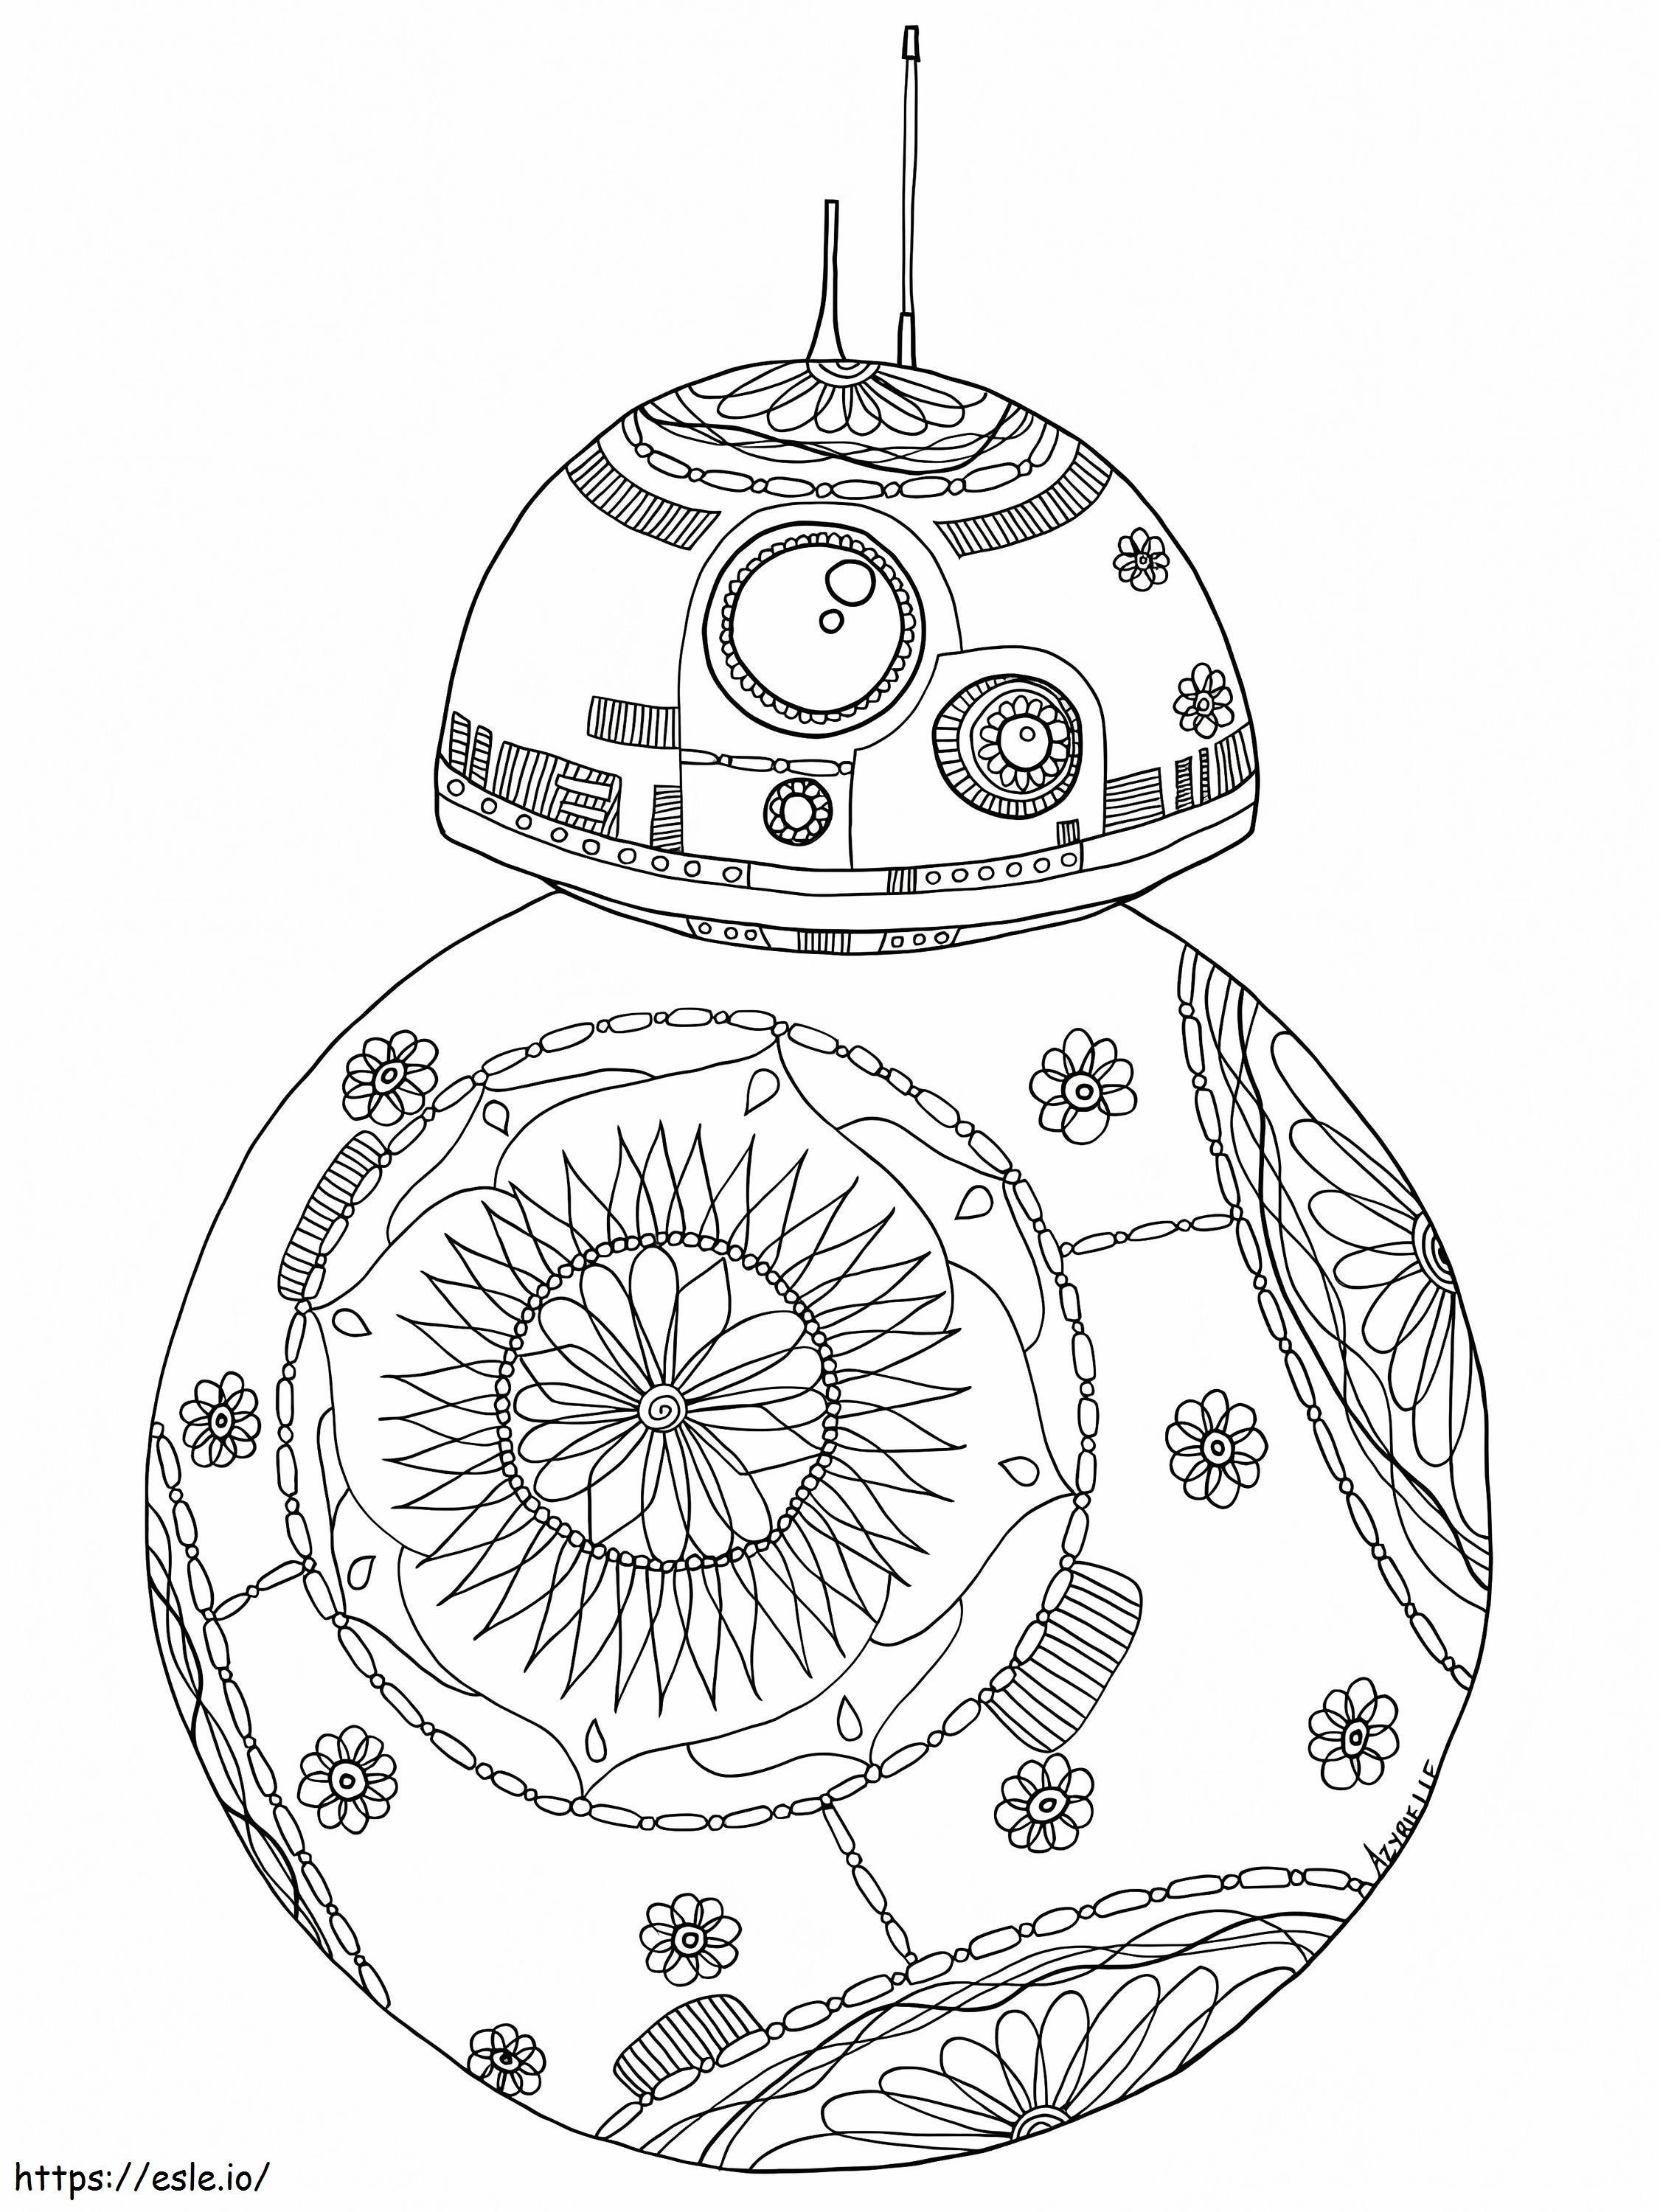 BB8 Star Wars coloring page